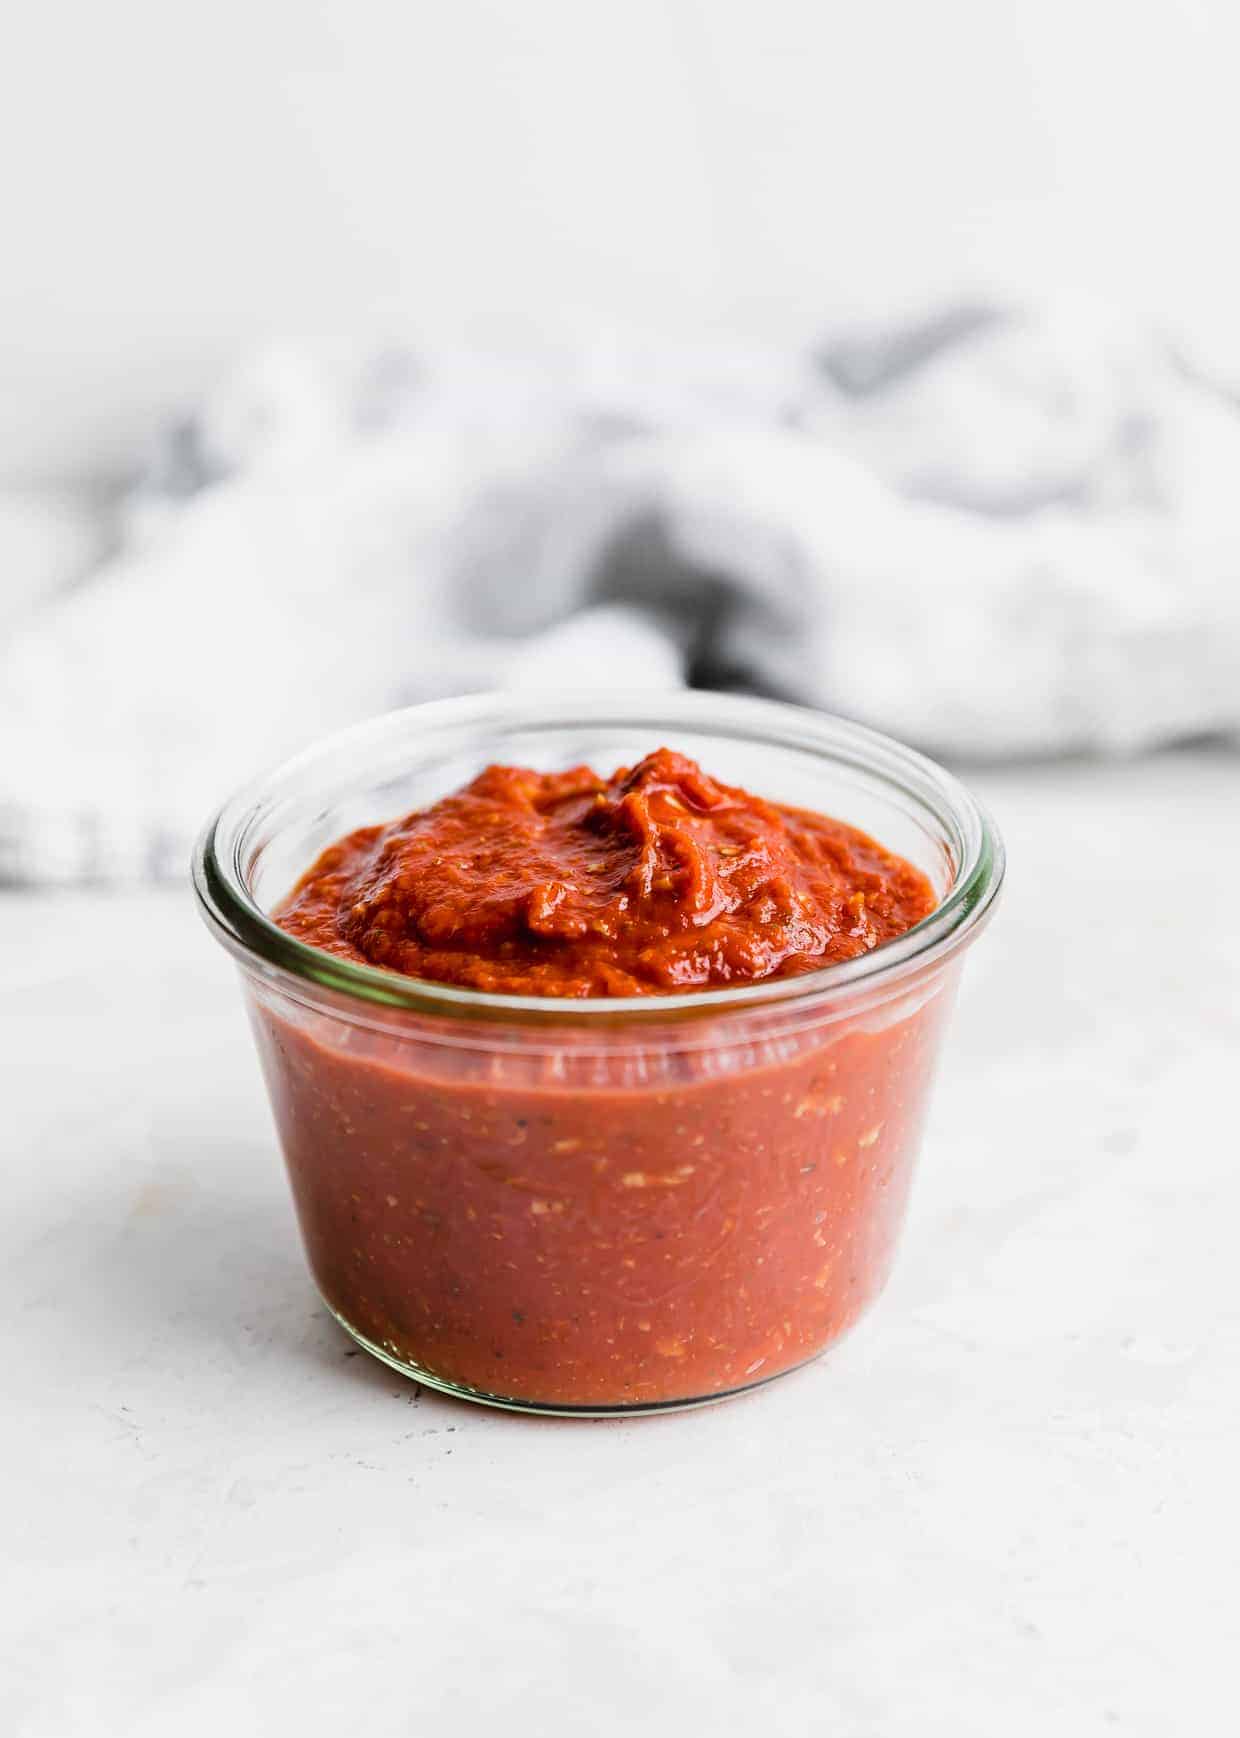 A glass jar full of Pizza Sauce from Tomato Paste against a white background. 